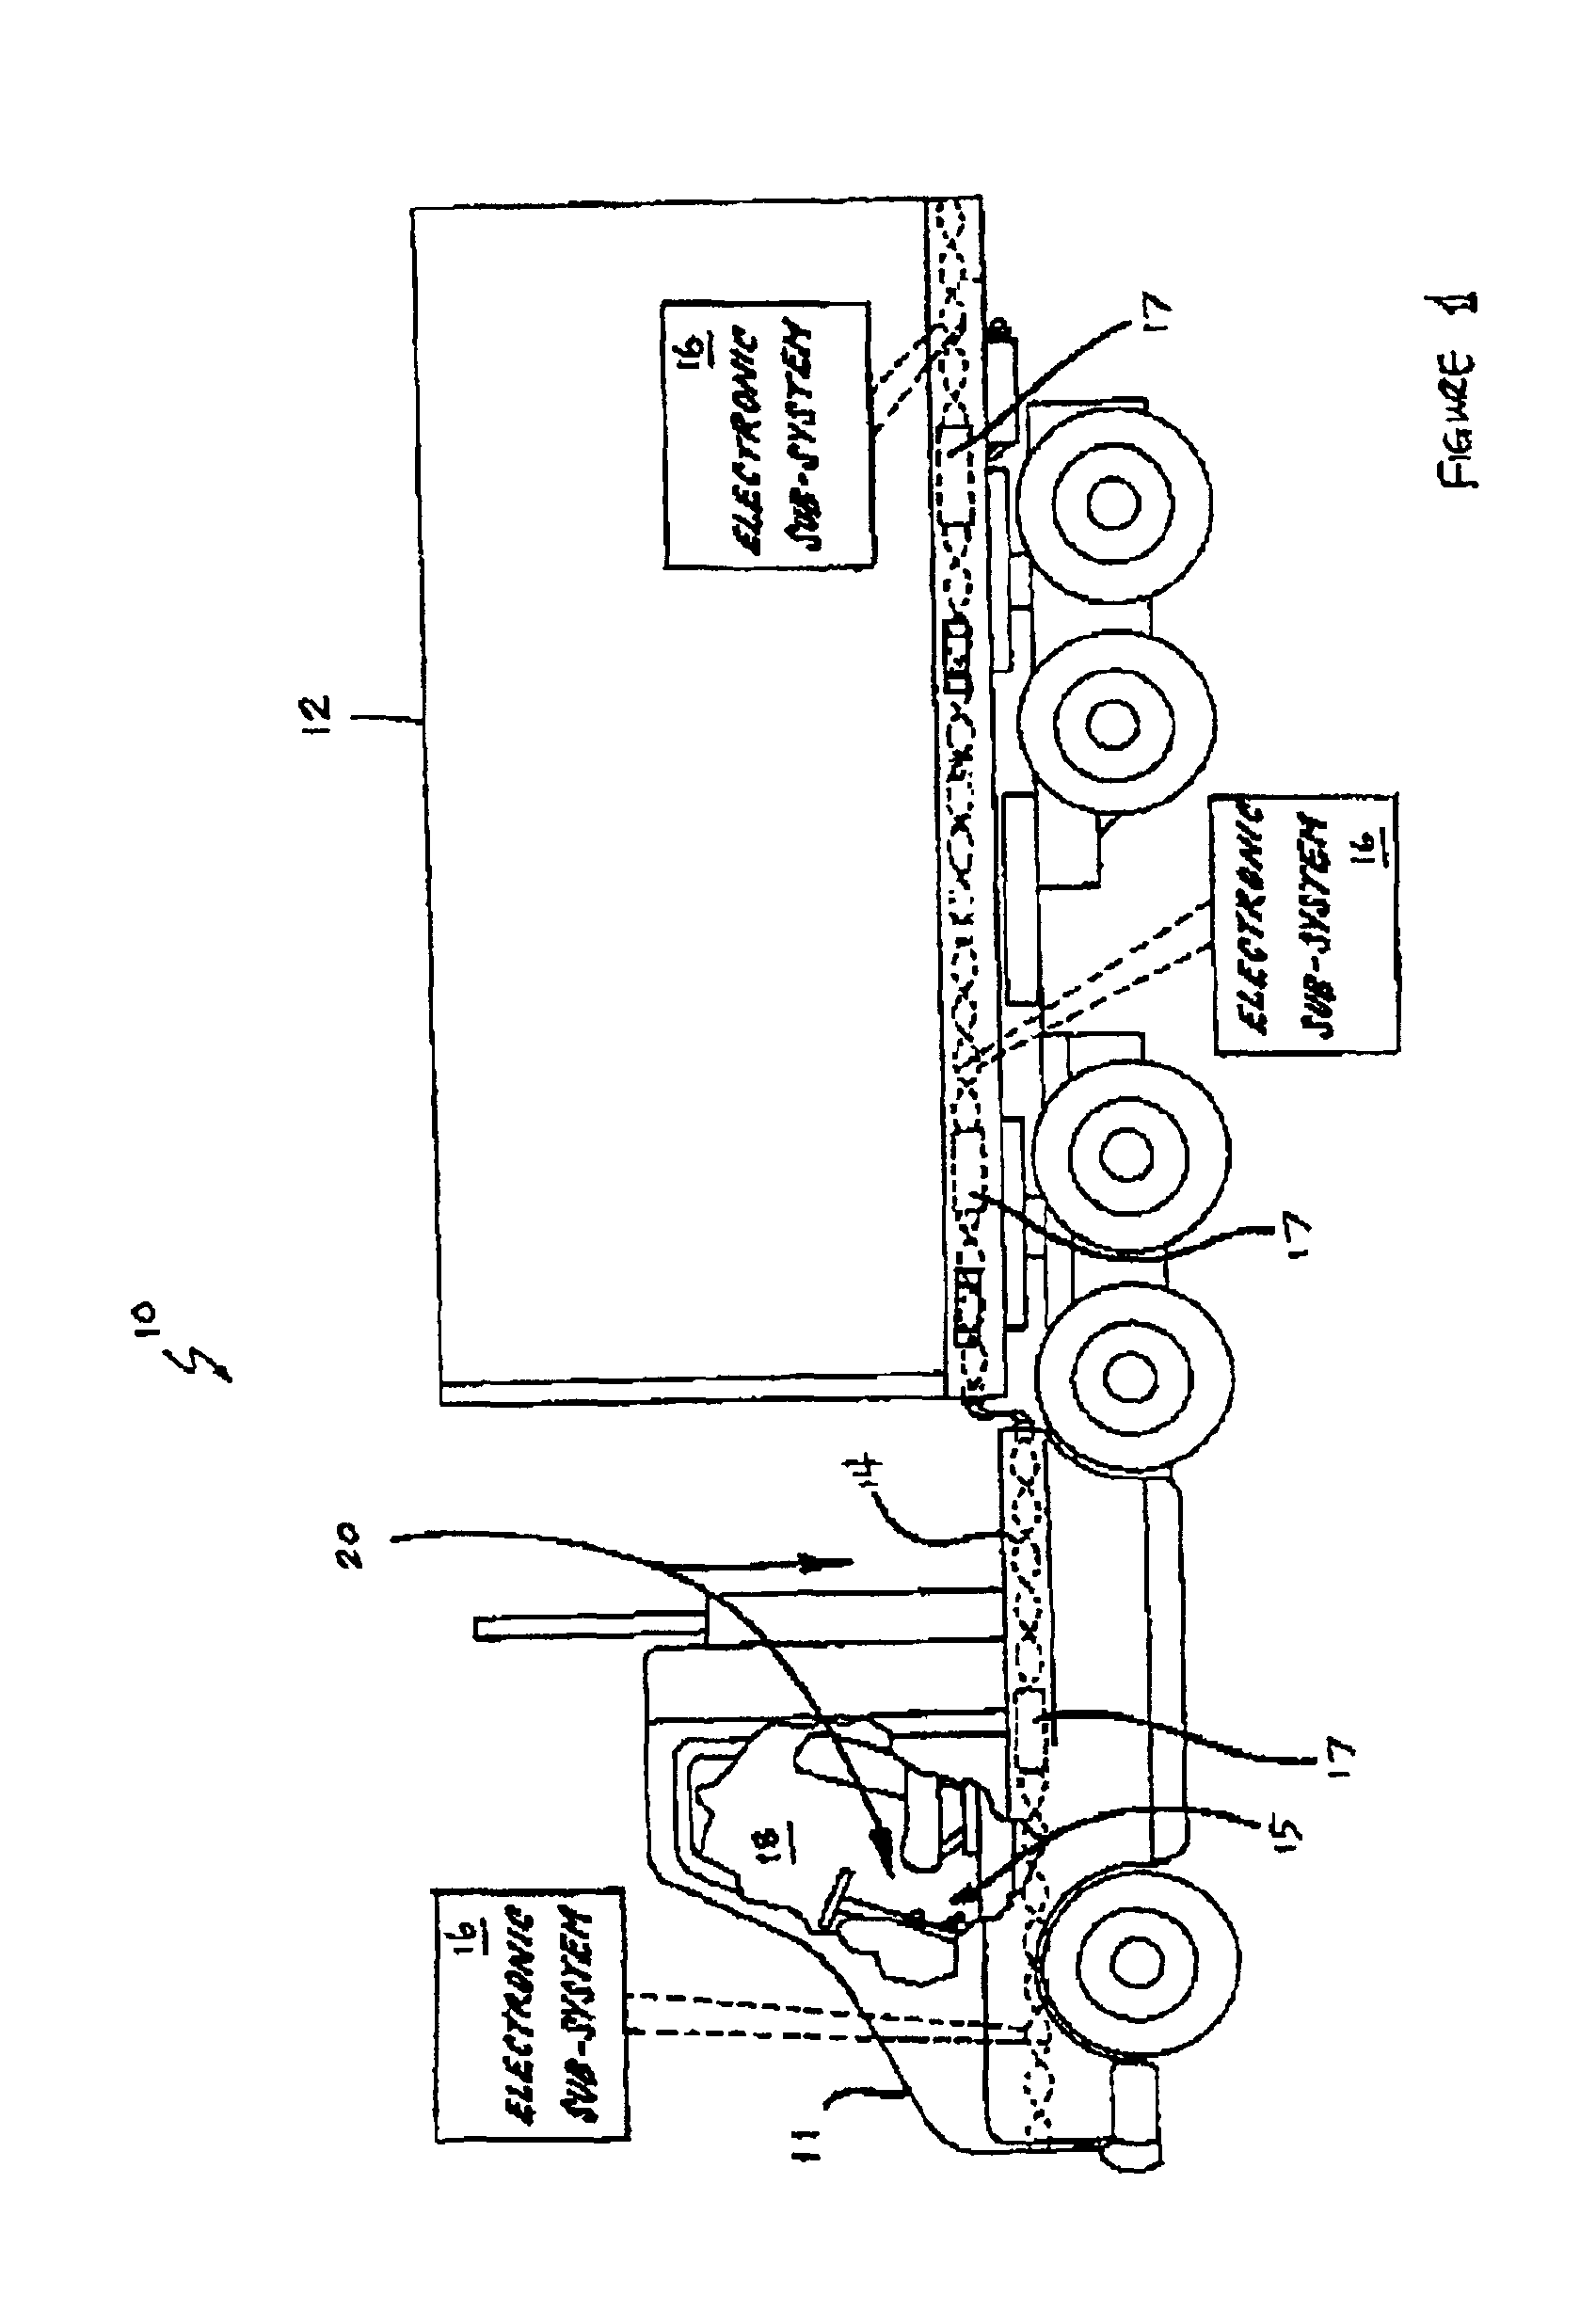 Apparatus and method for enhanced data communications and control between a vehicle and a remote data communications terminal